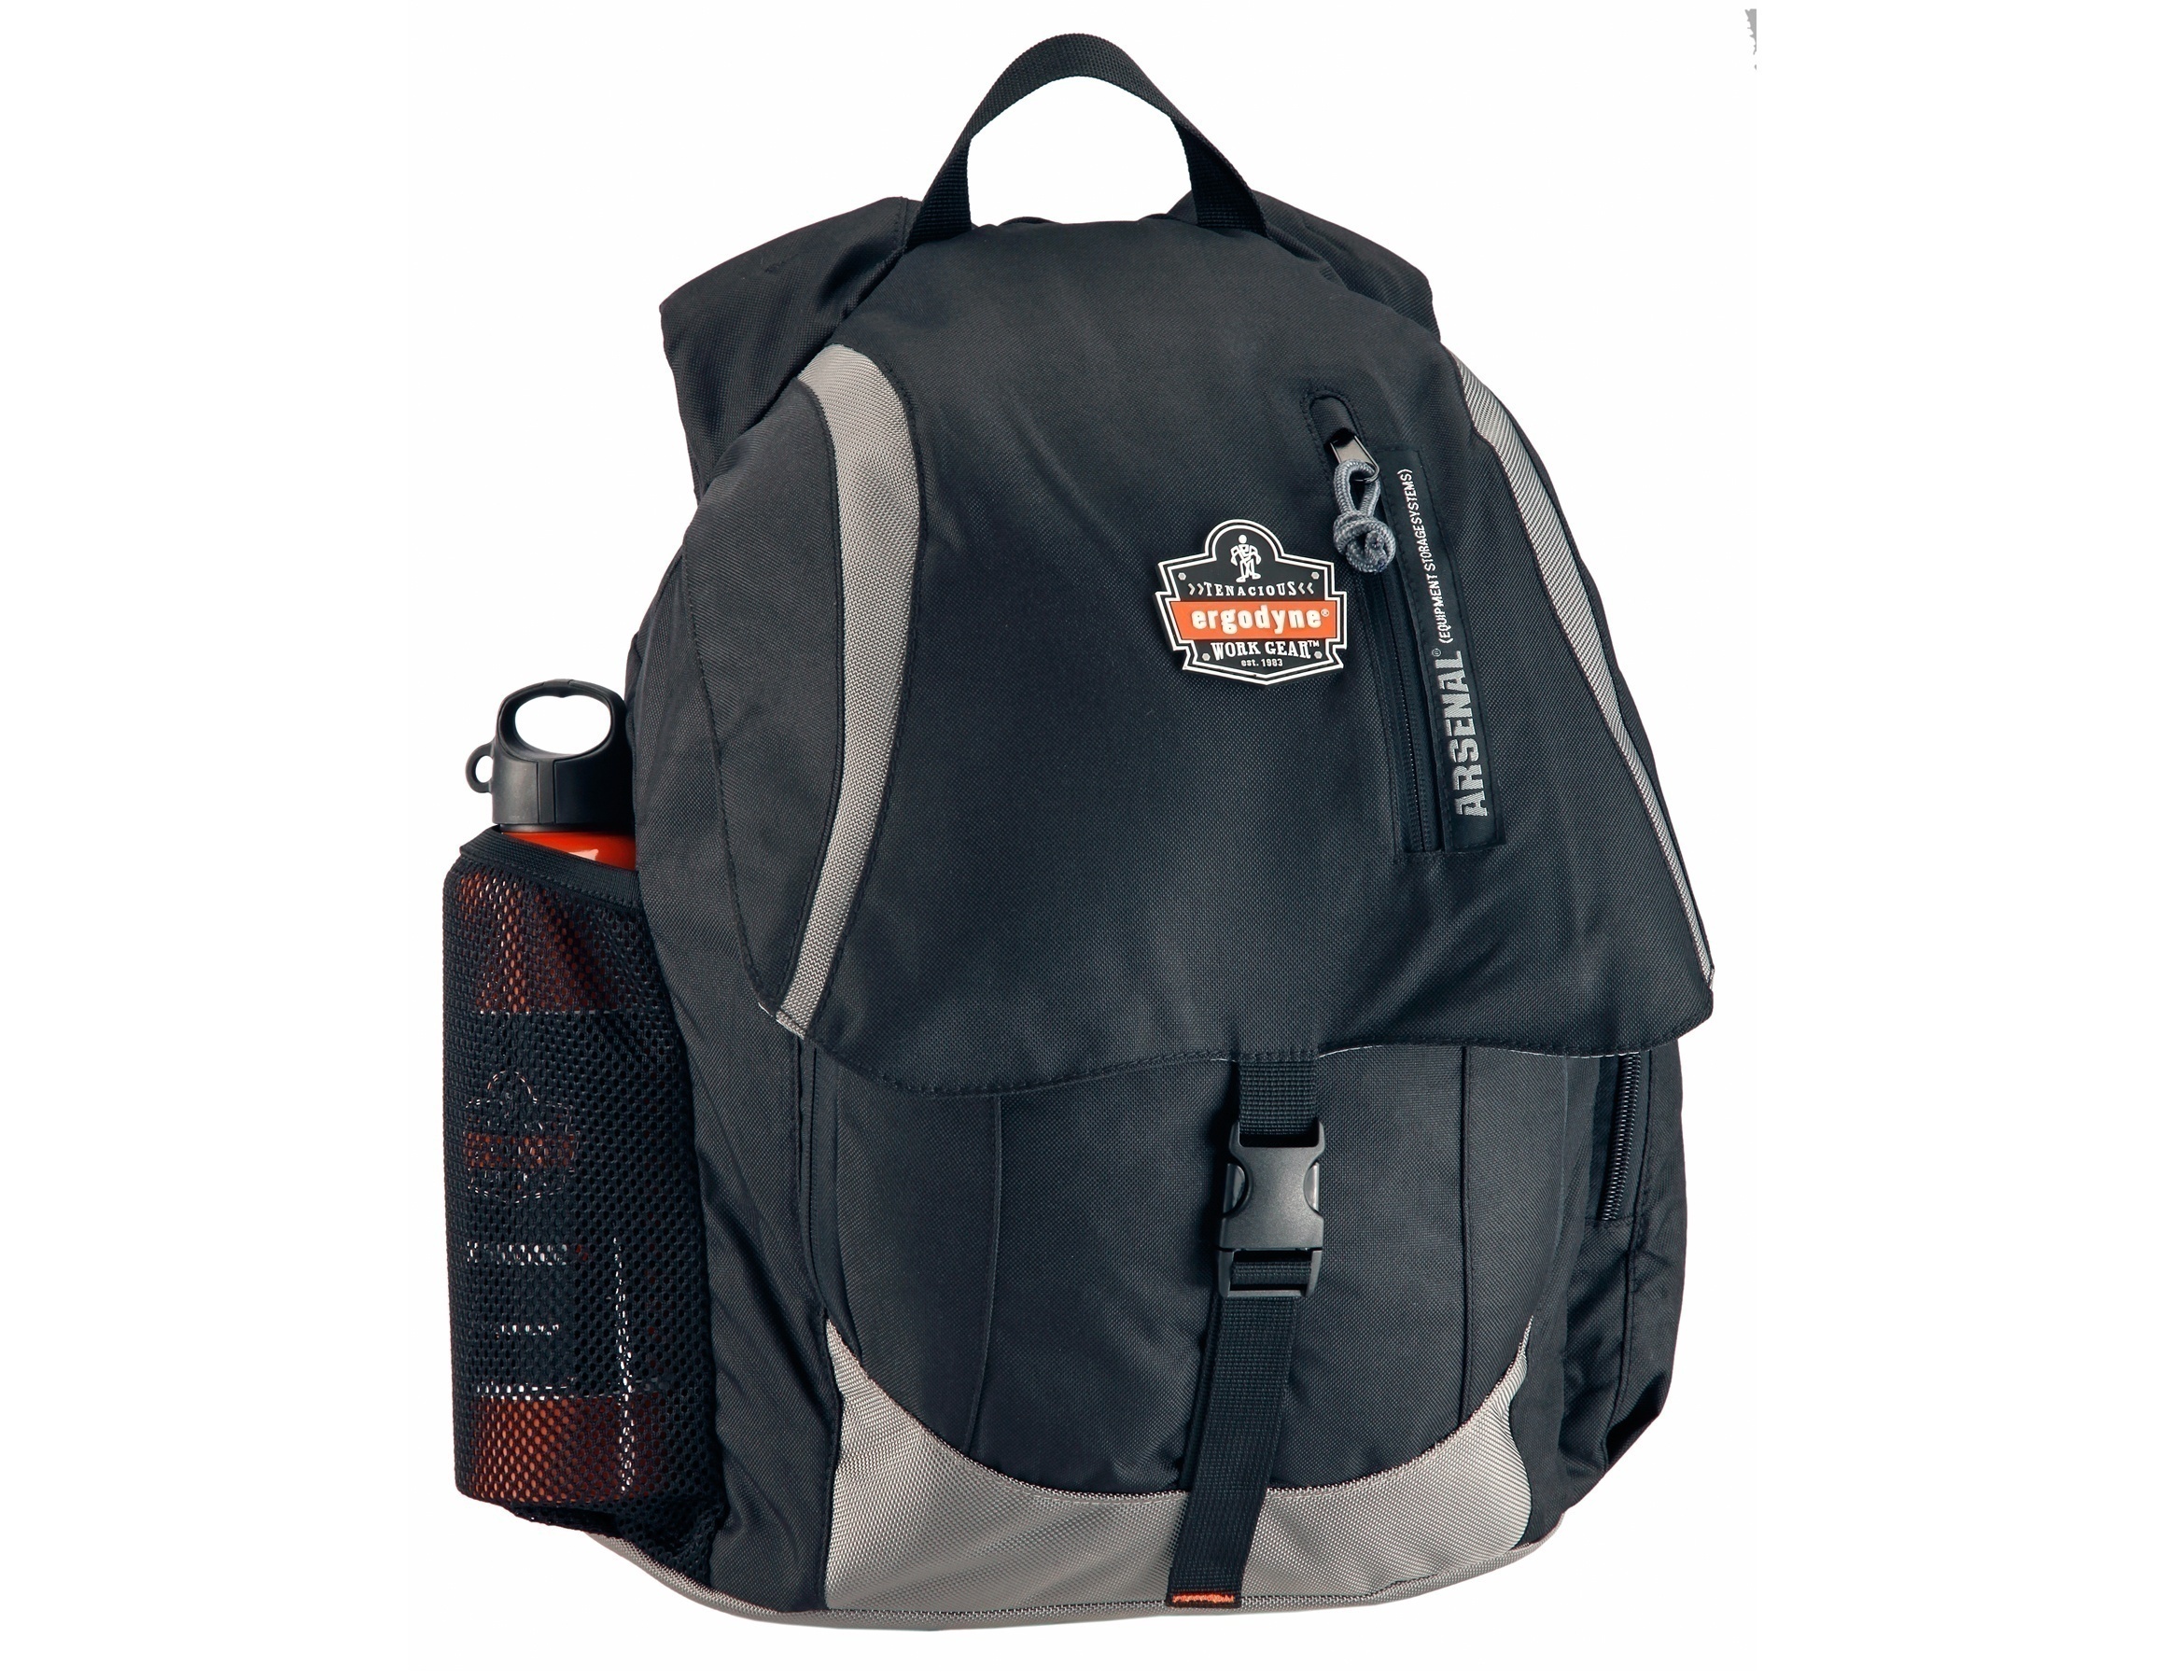 Ergodyne GB5143 Arsenal General Duty Back Pack from Columbia Safety